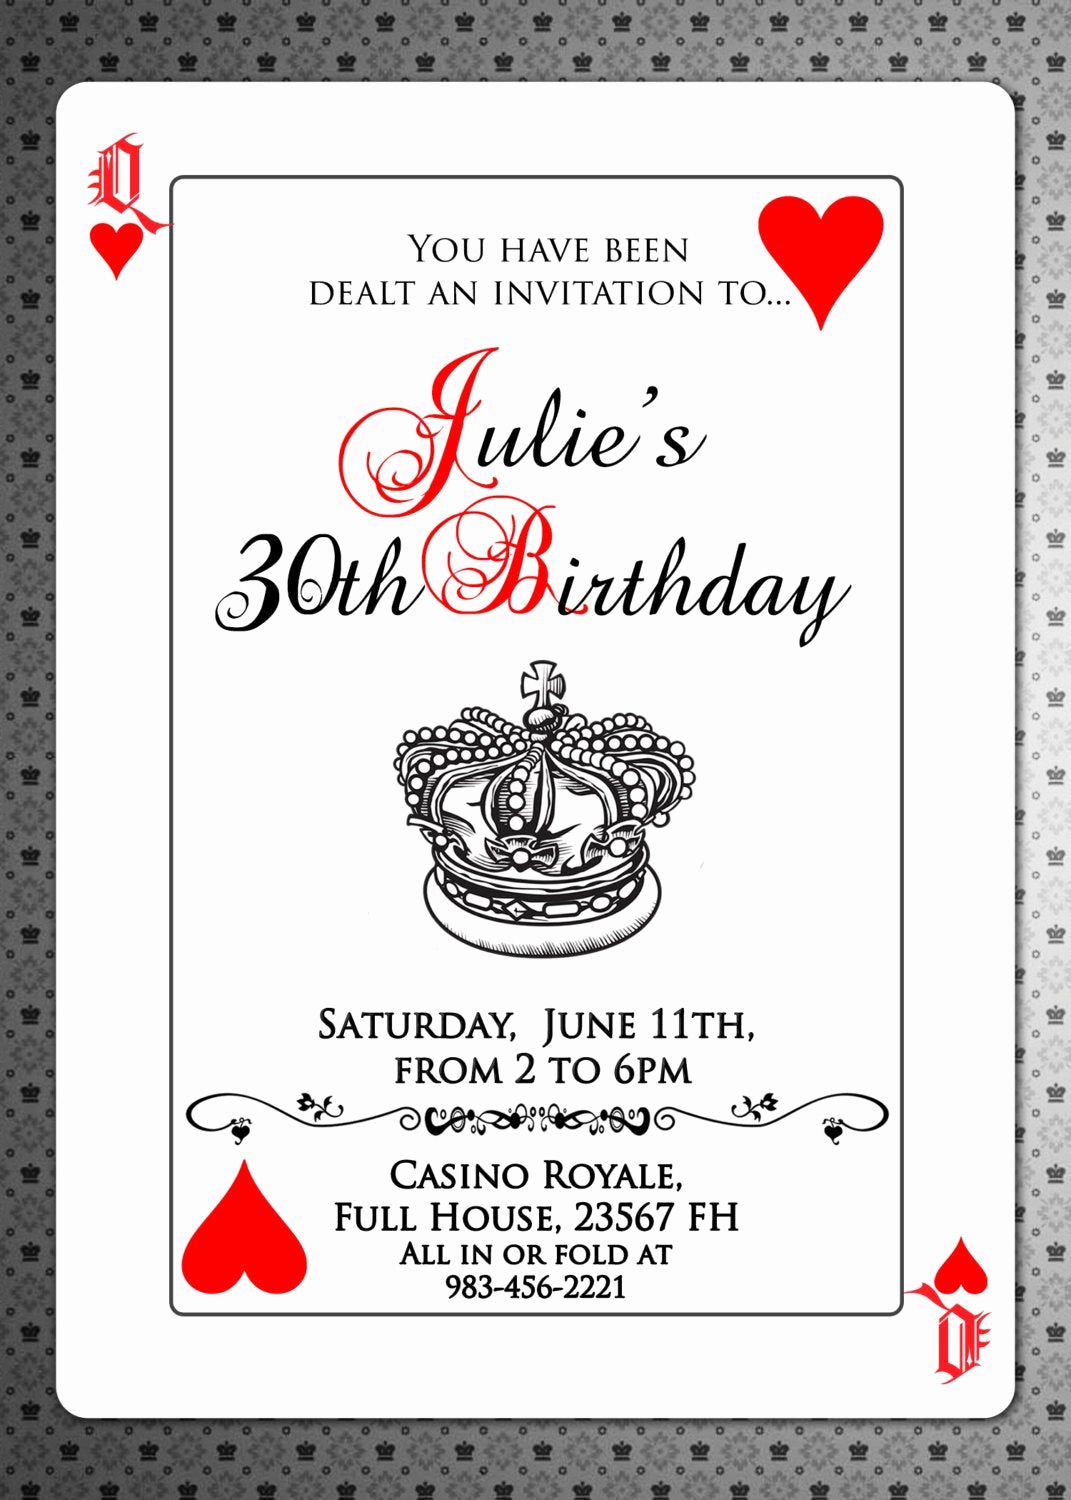 Queen Of Hearts Invitation Inspirational Playing Cards Invitation Poker Invite Royal Queen Of